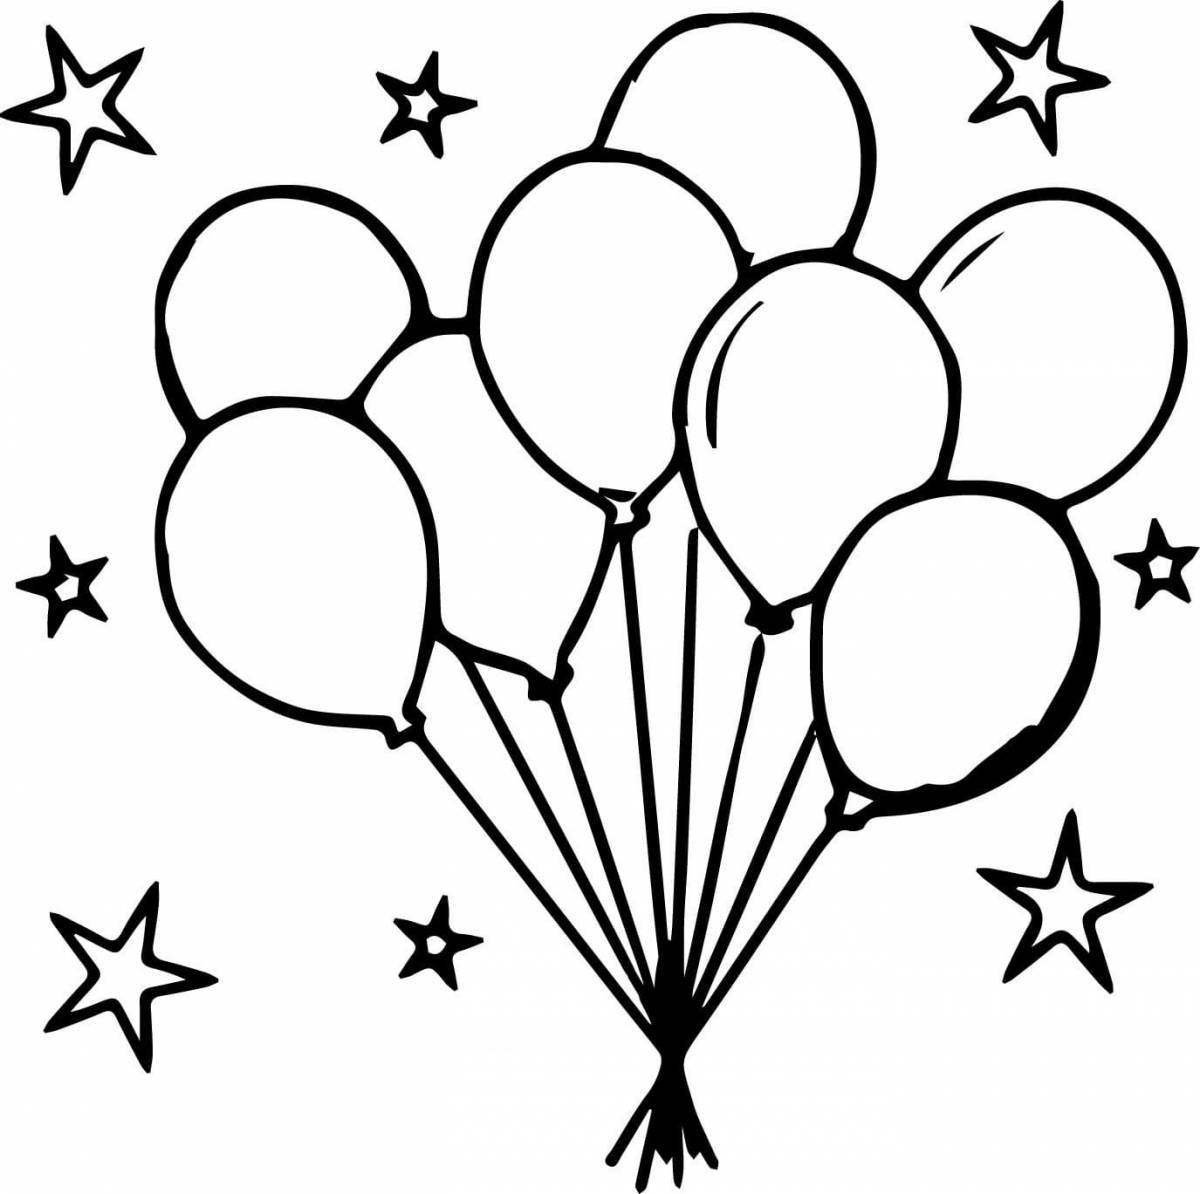 Dazzling balloons coloring book for kids